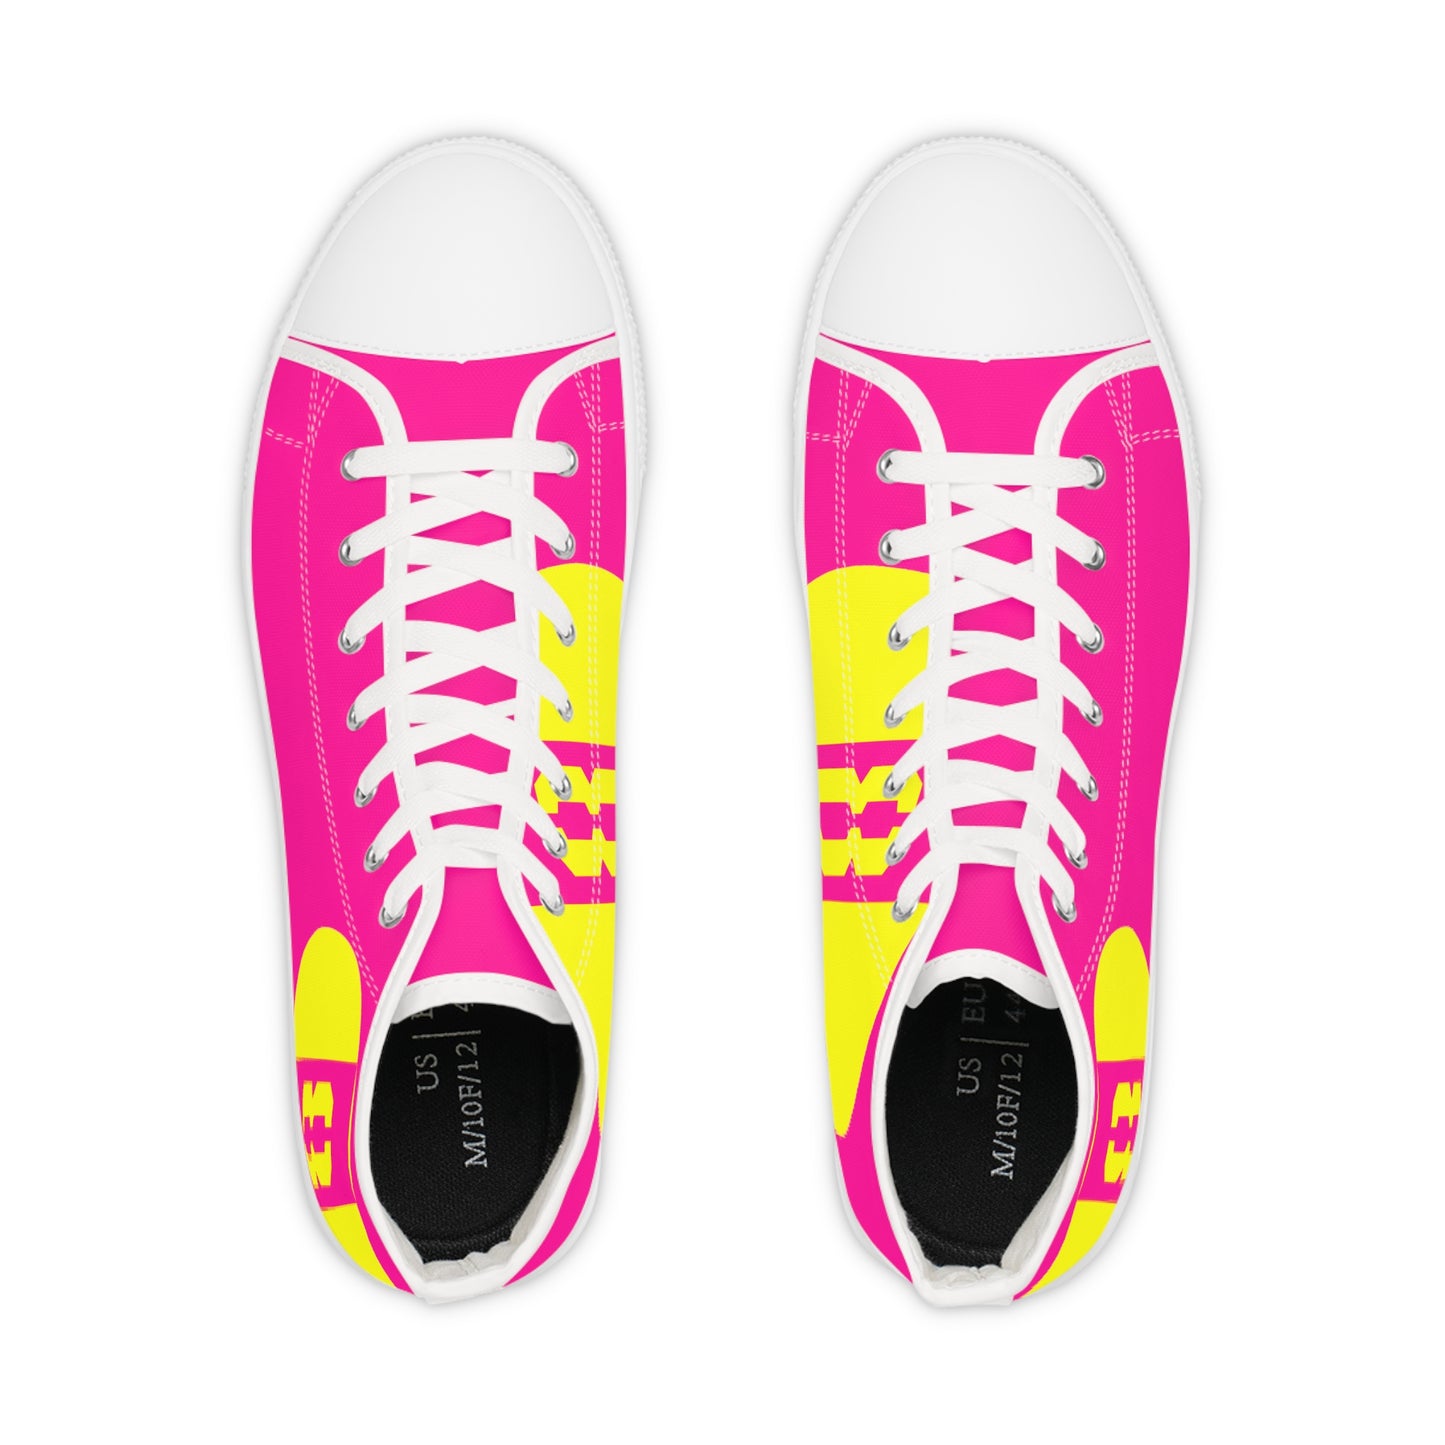 Limited Edition High Top Sneakers - 8 - Pink